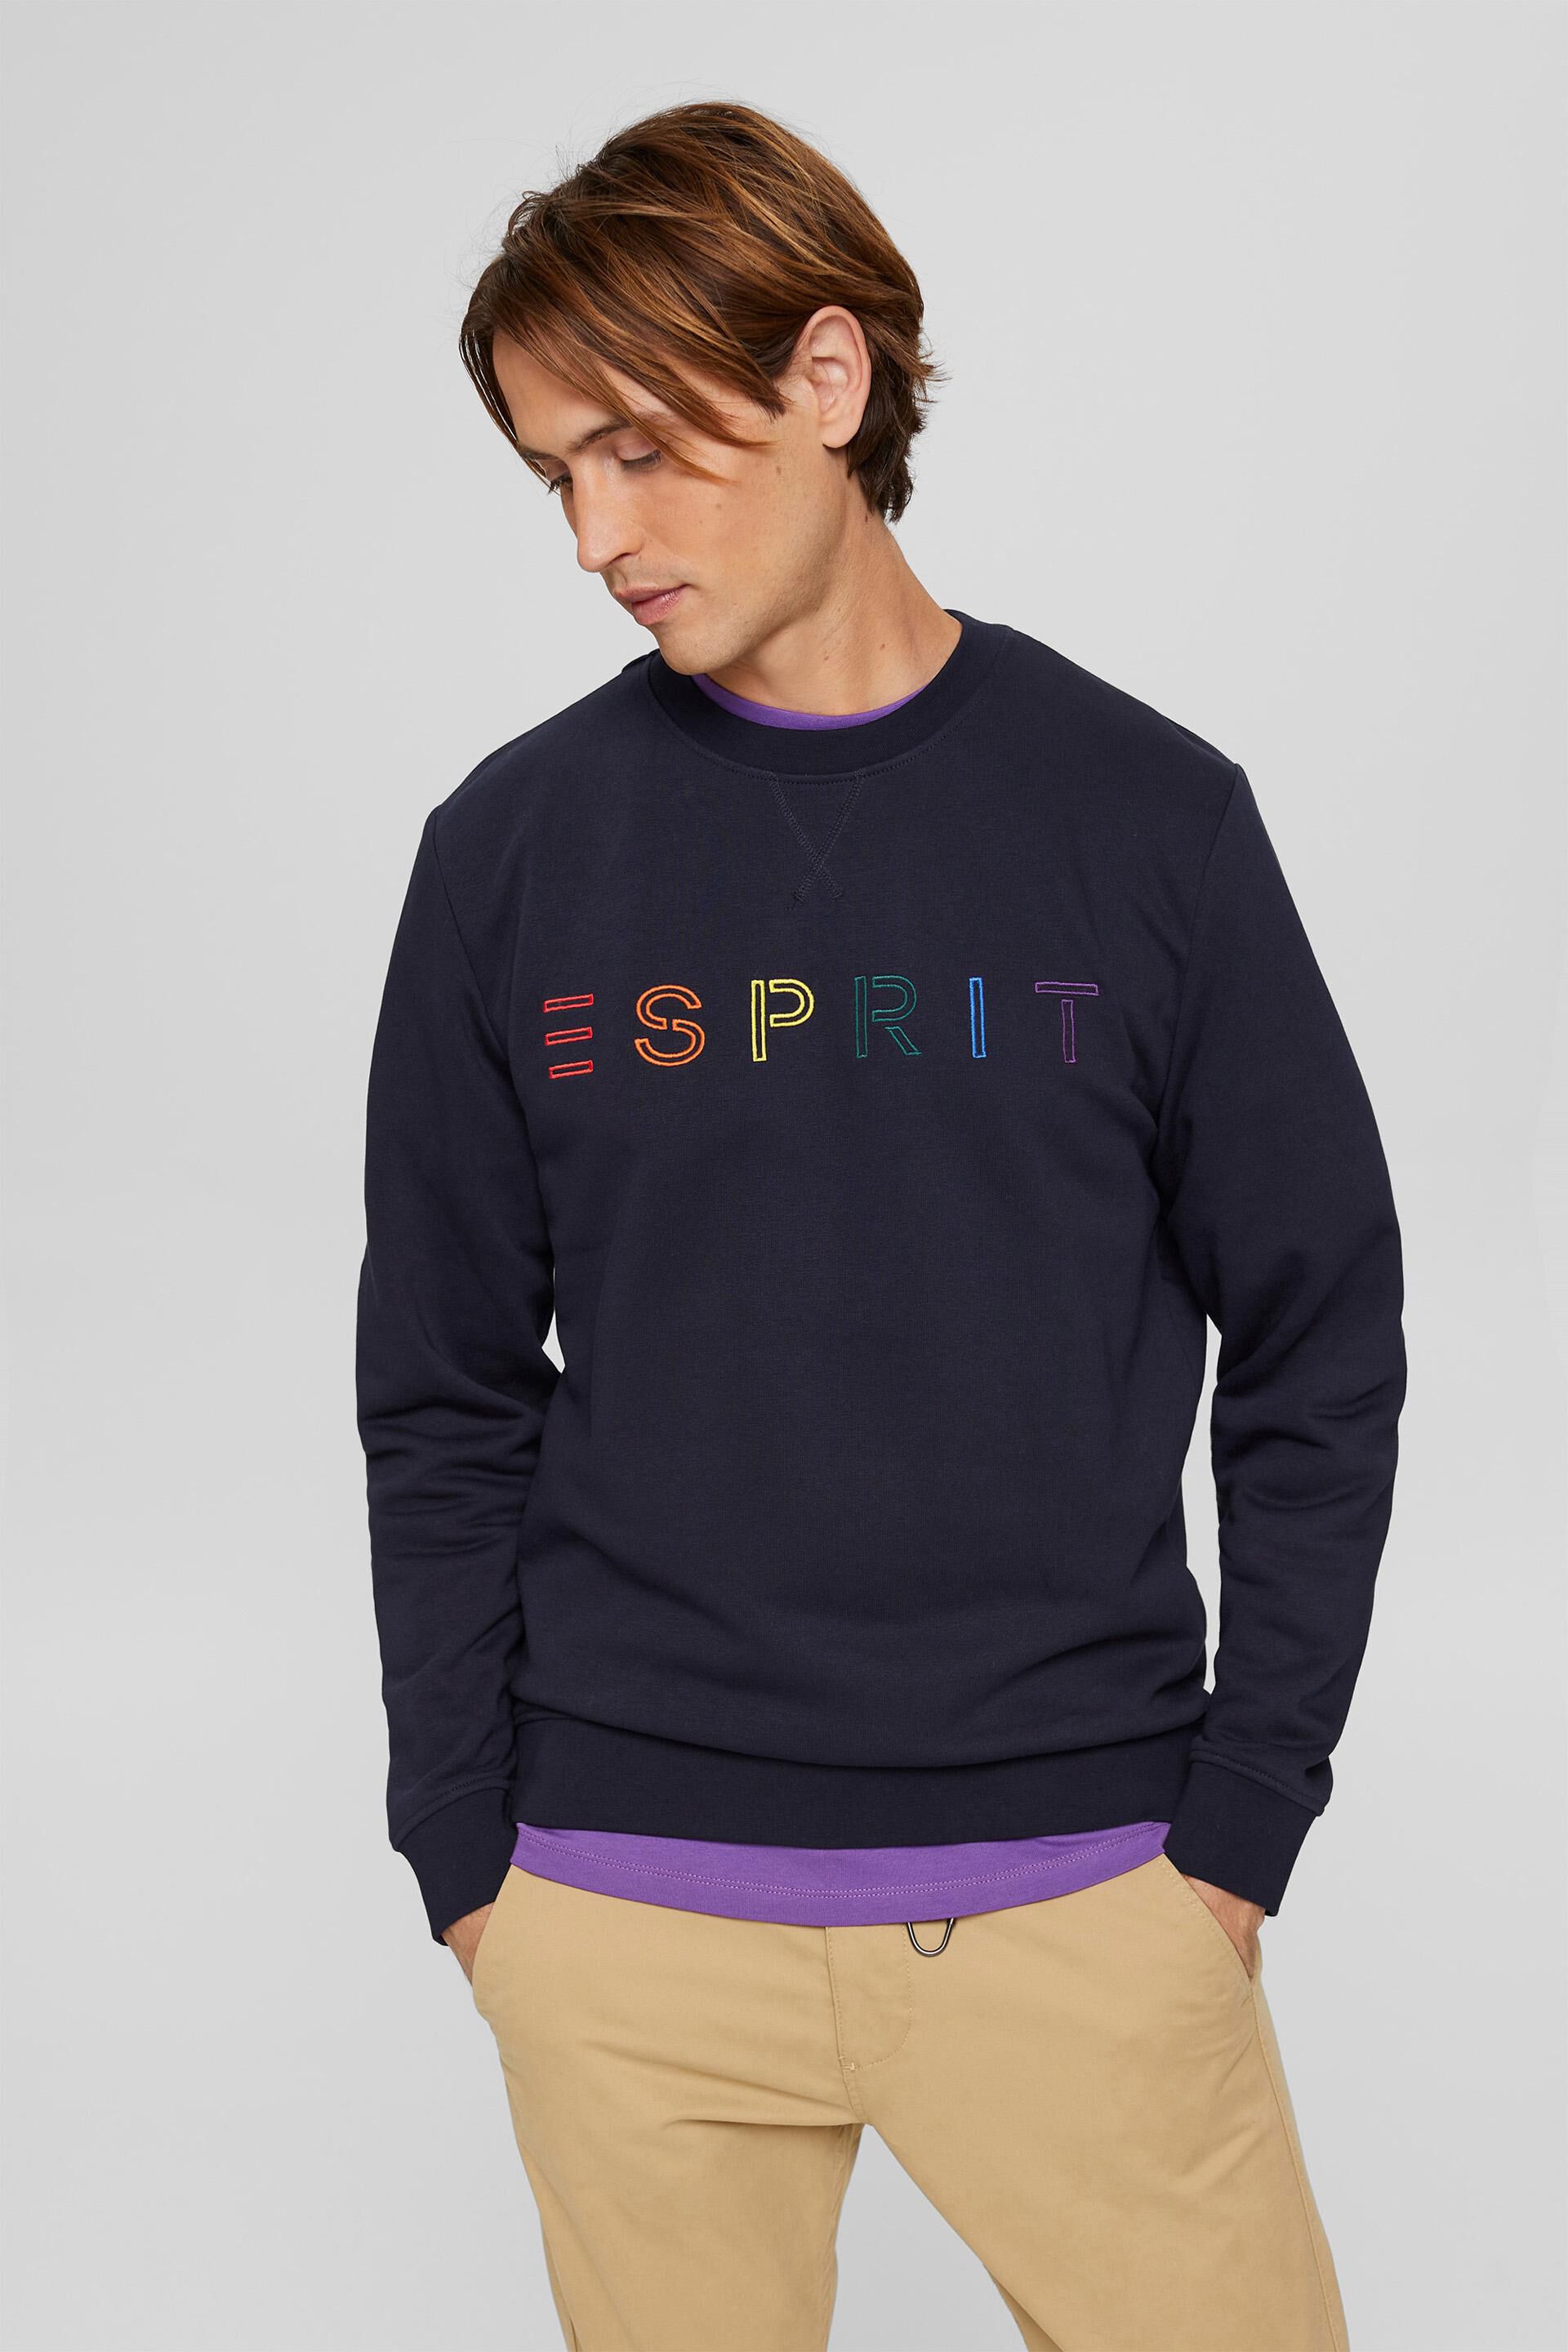 Esprit embroidery sweatshirt logo with Recycled: